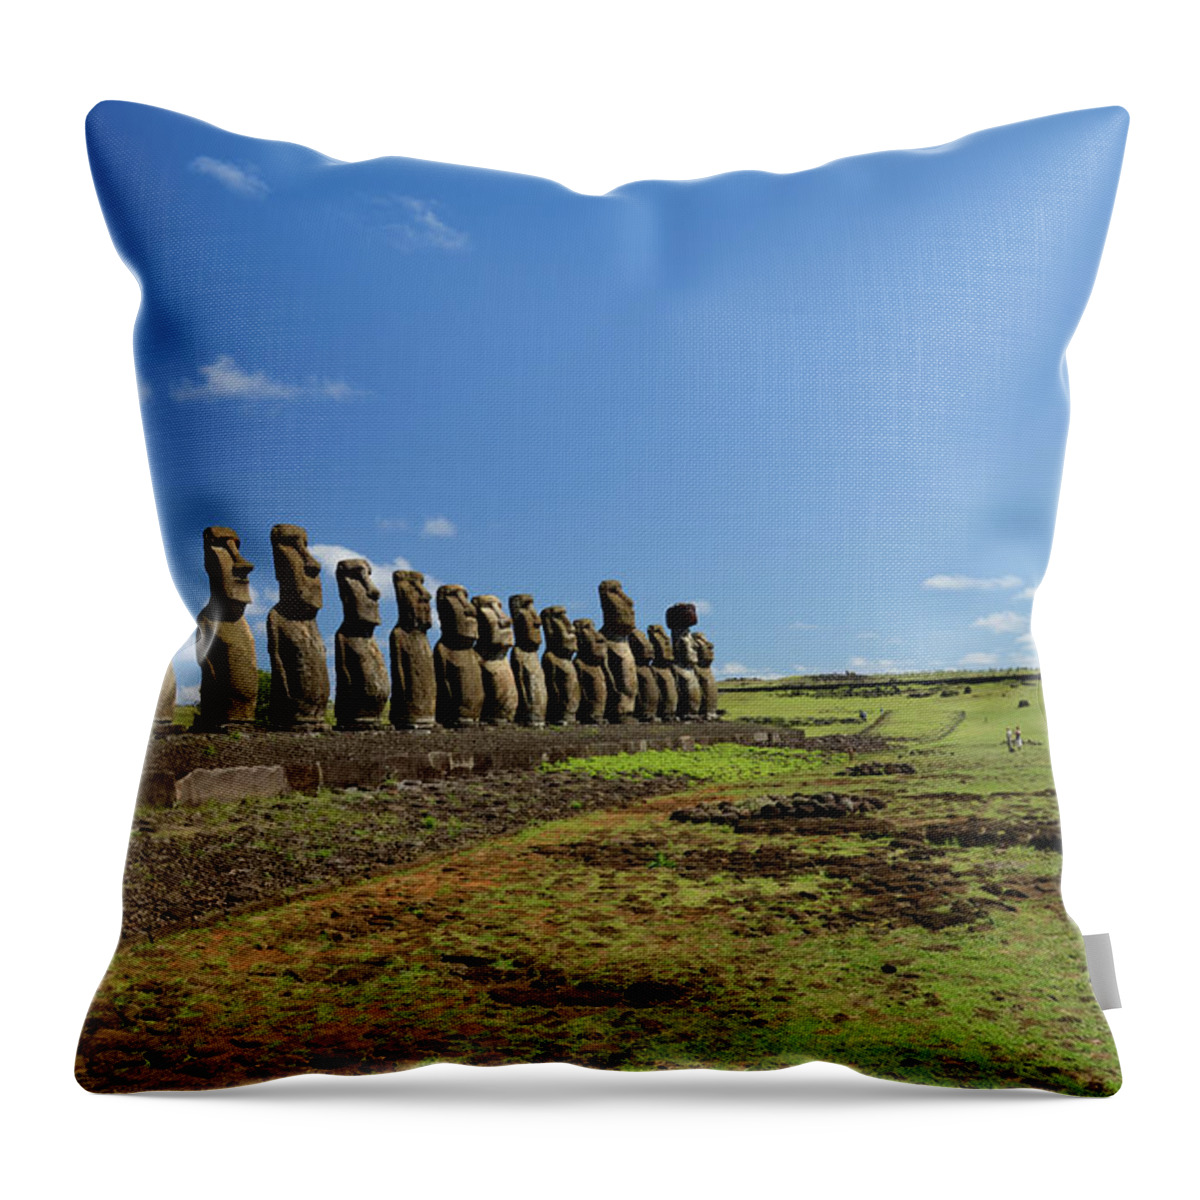 Grass Throw Pillow featuring the photograph Ahu Tongariki by Marko Stavric Photography